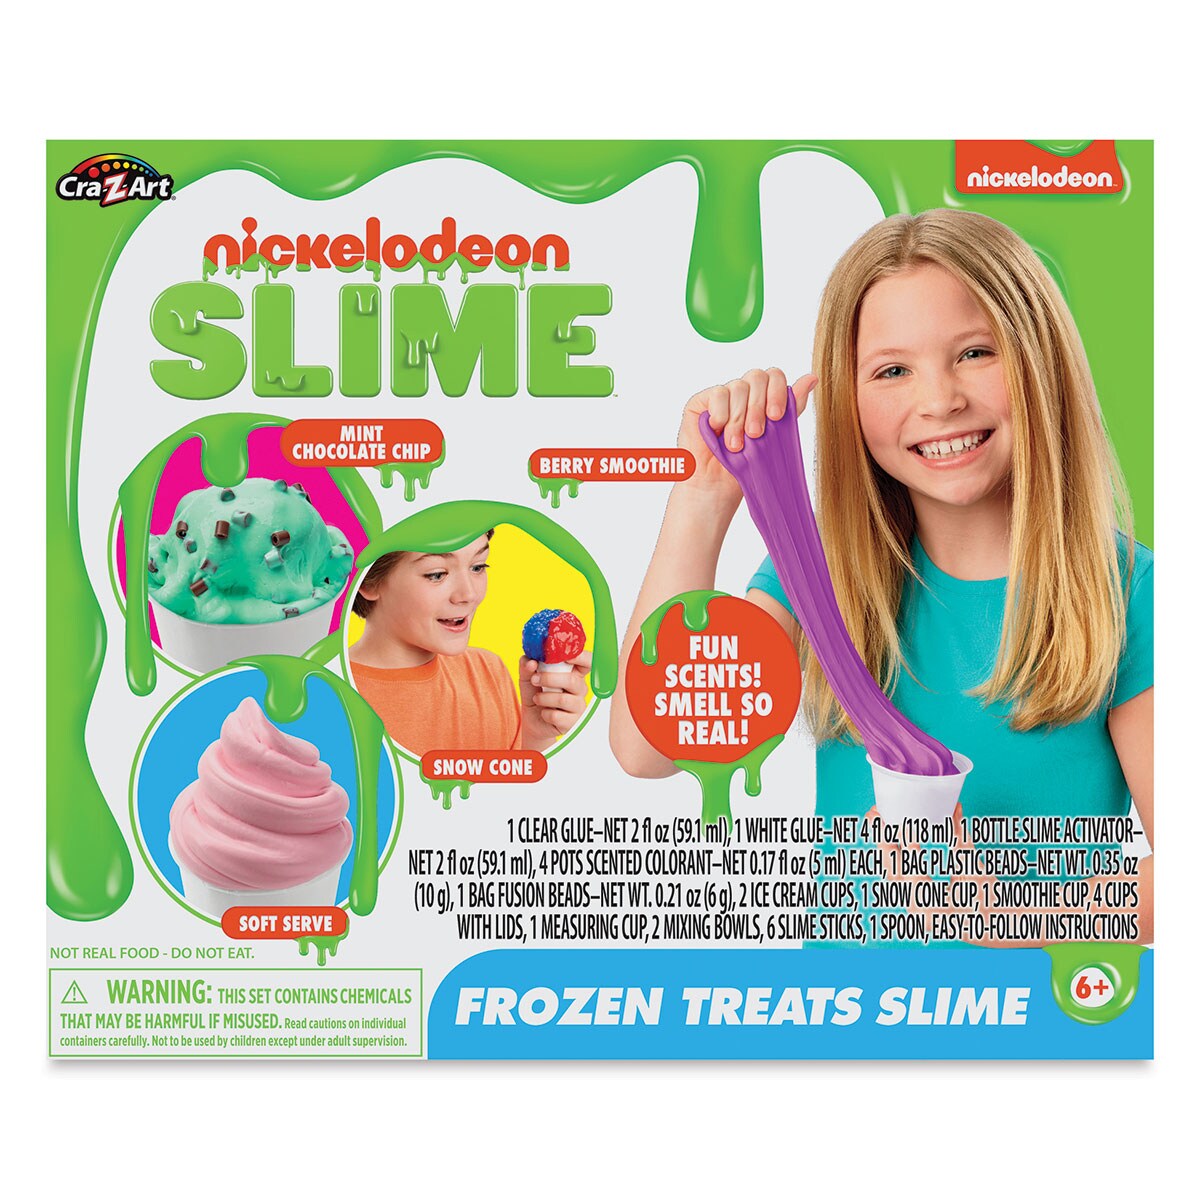 NICKELODEON SWEET SLIME CREATIONS - The Toy Insider